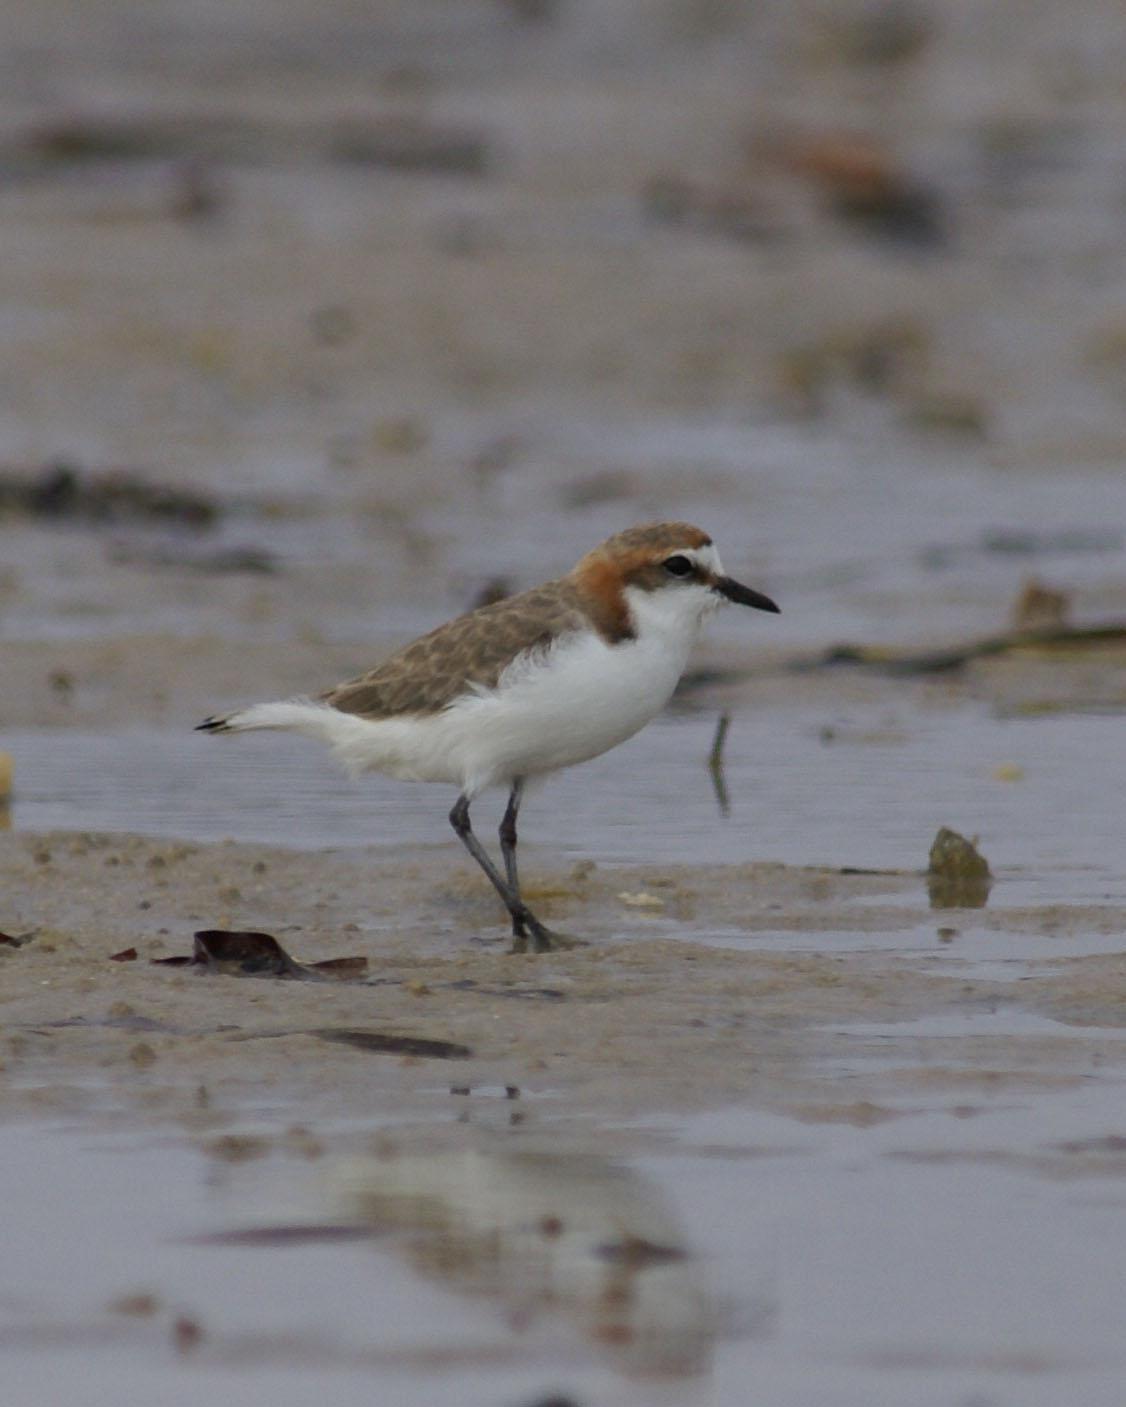 Red-capped Plover Photo by Steve Percival